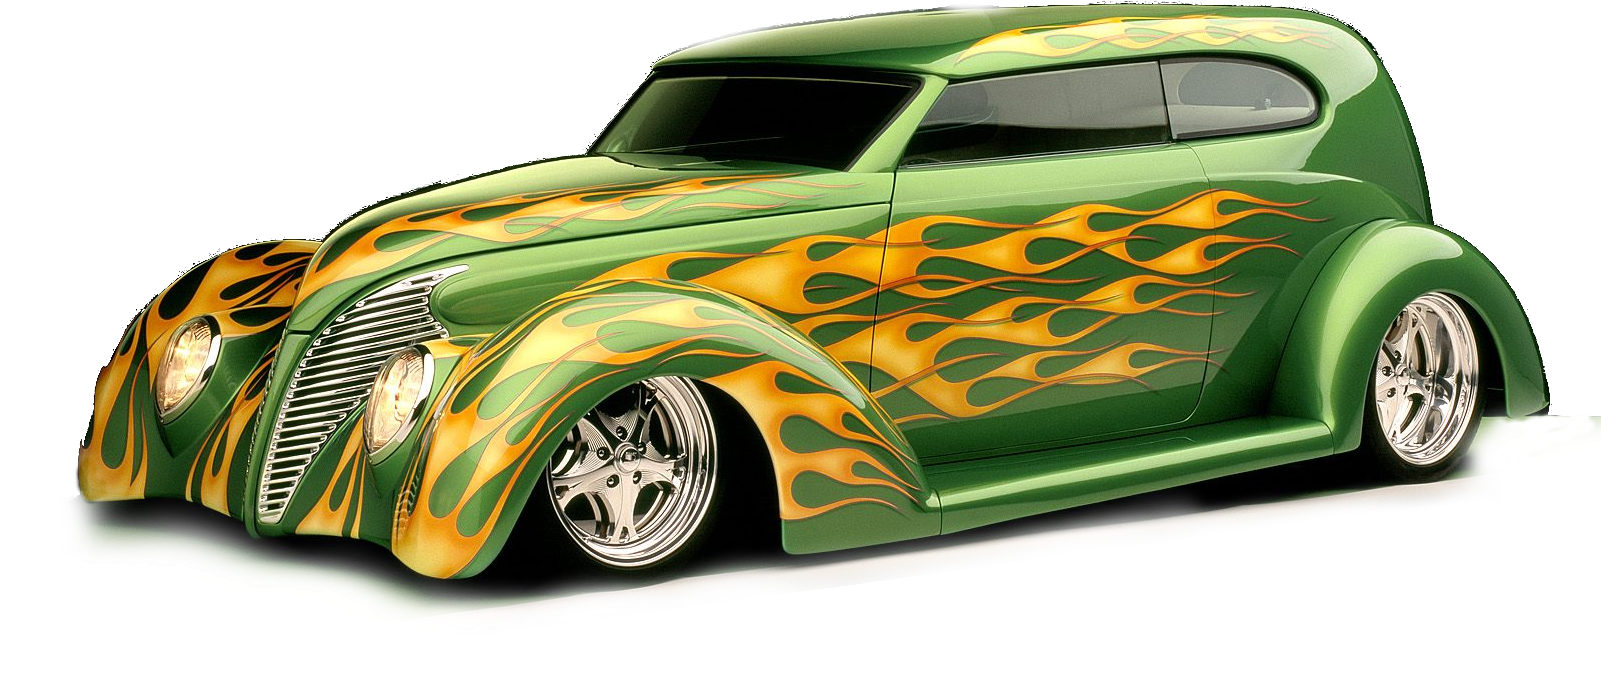 Png Car - Green Flames On Hot Rods (1600x1200)